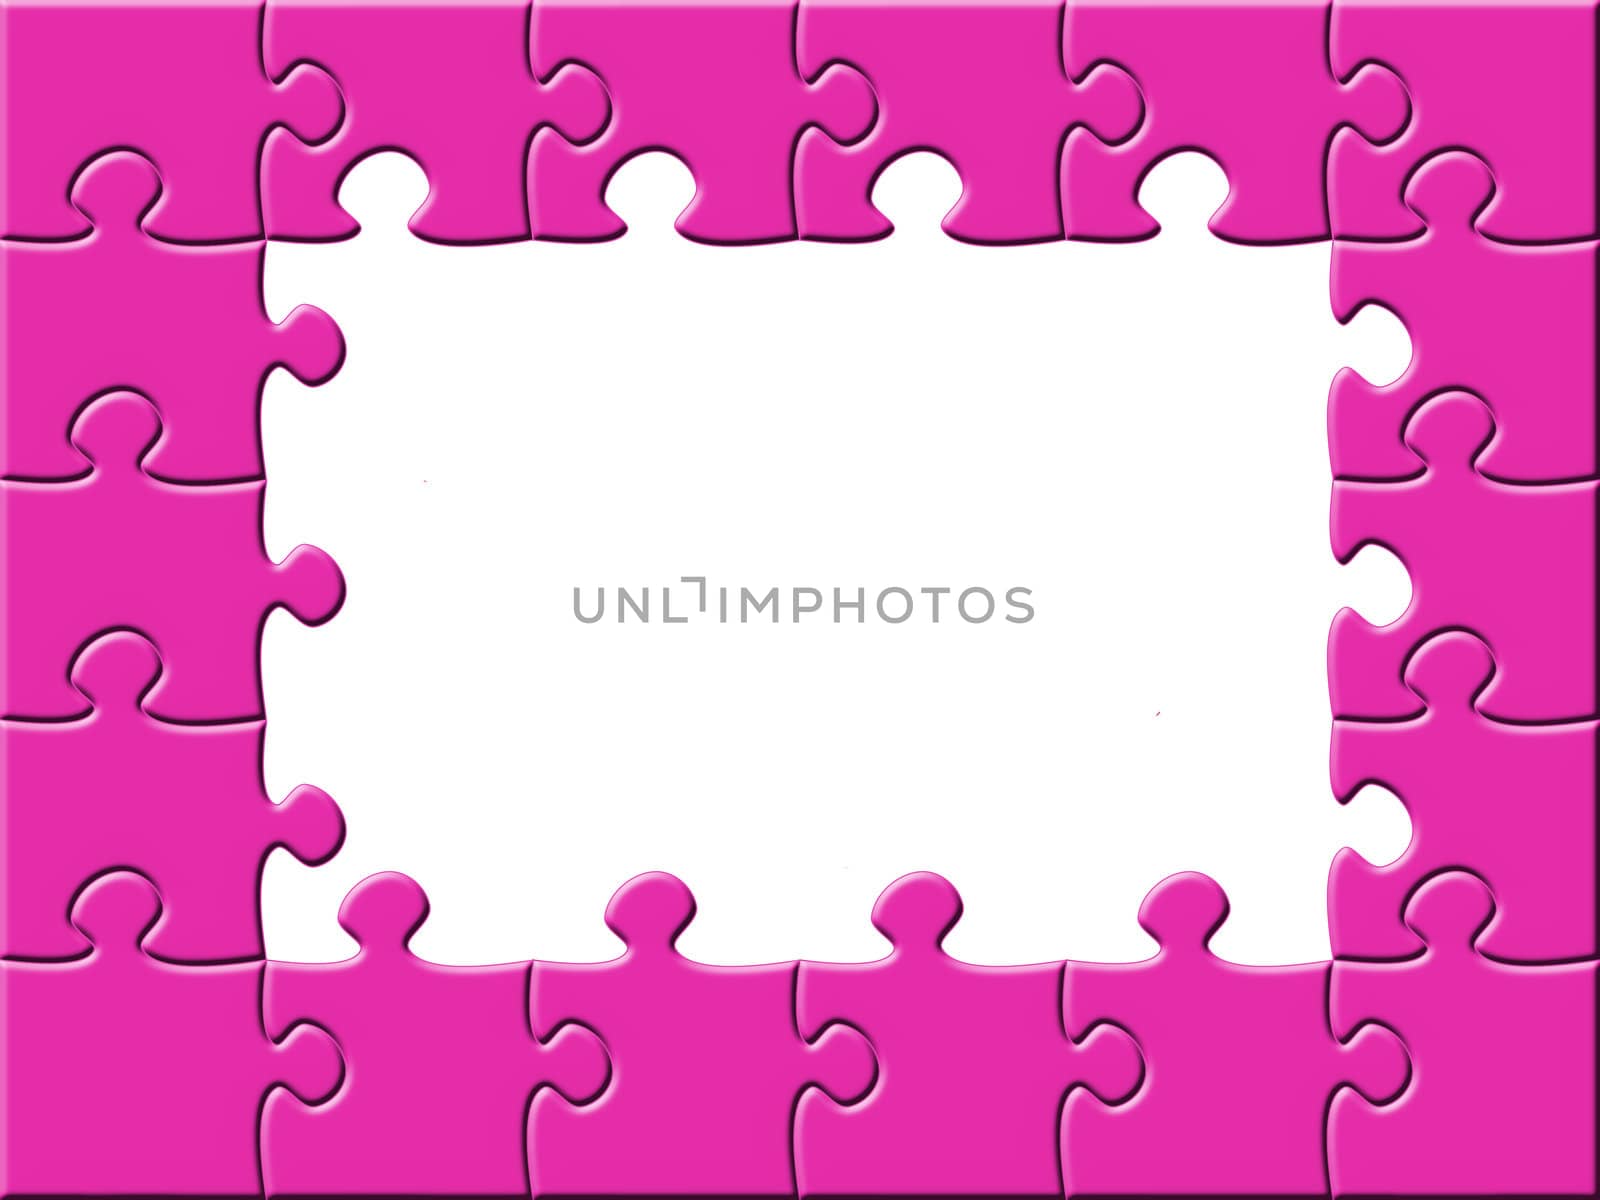 an illustration showing a pink puzzle frame